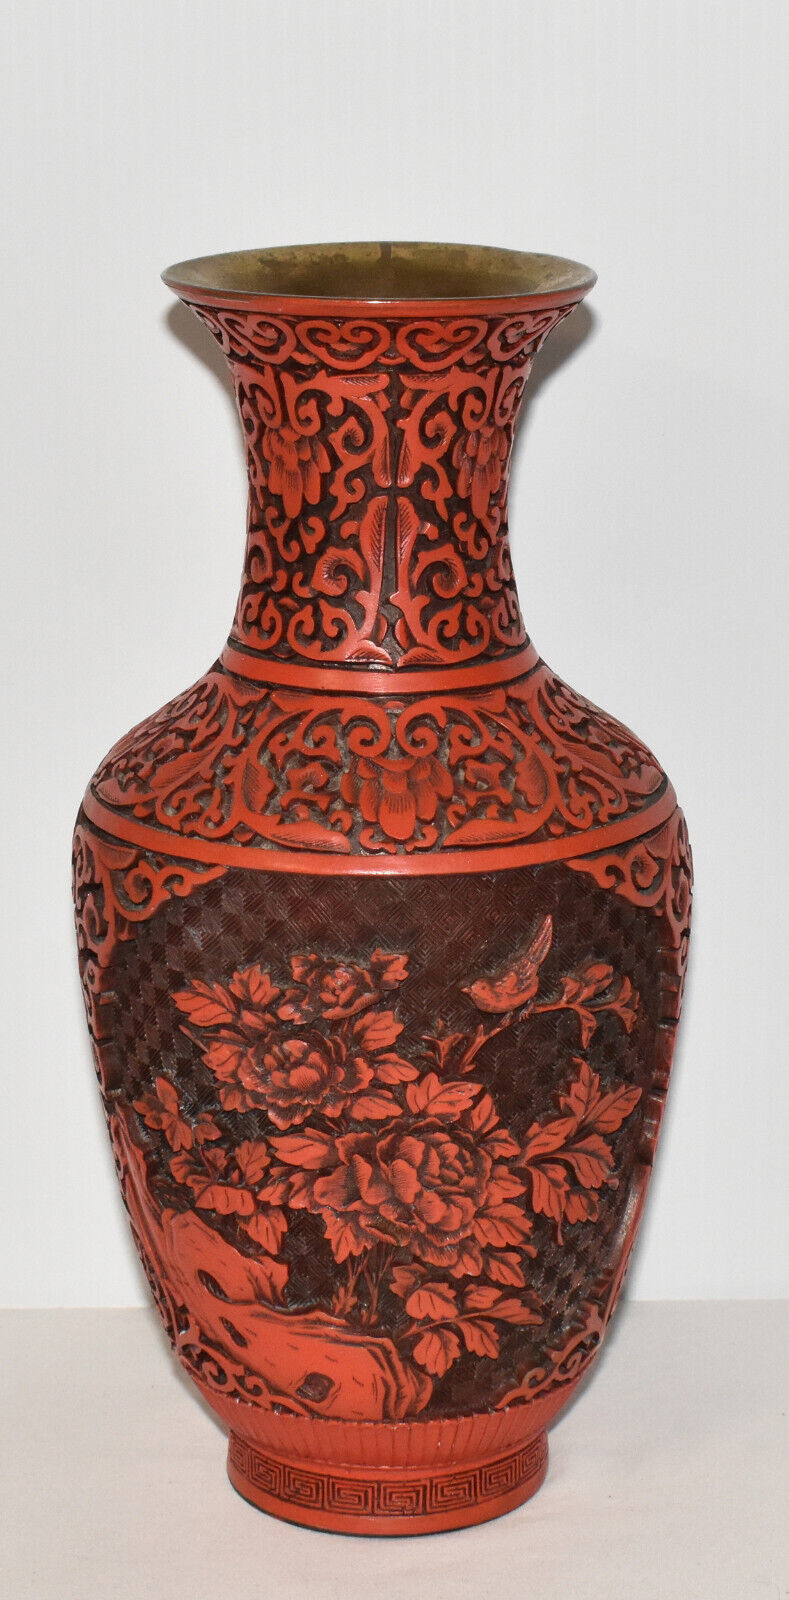 Primary image for Vintage Chinese 12" Cinnabar Vase Carved Lacquer over Brass Bird Floral Motif